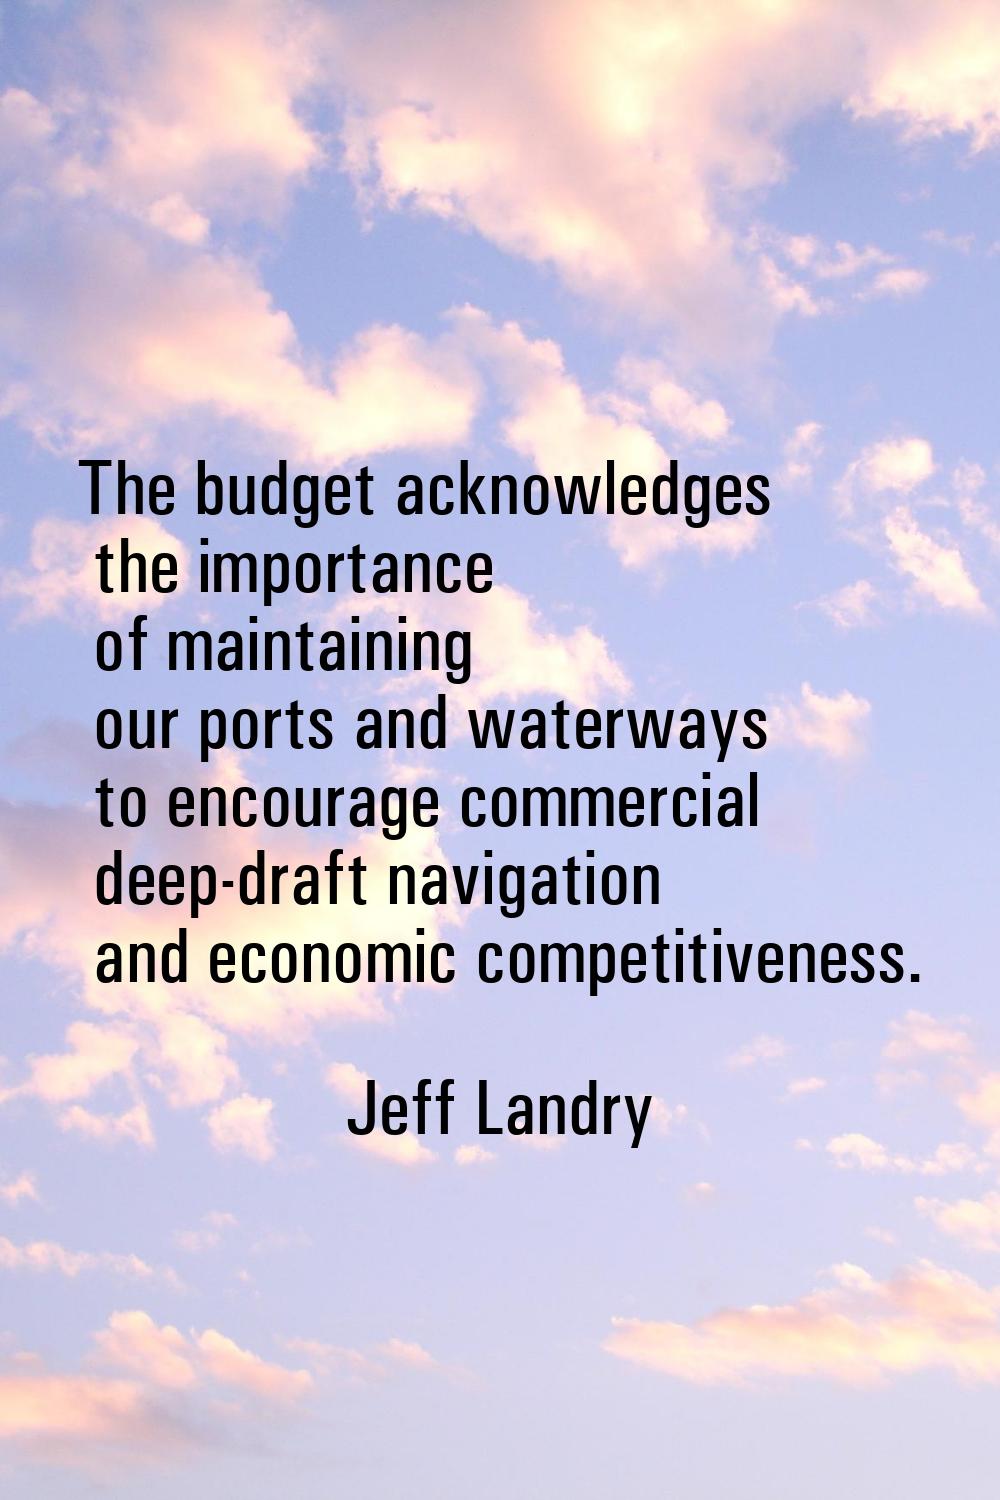 The budget acknowledges the importance of maintaining our ports and waterways to encourage commerci